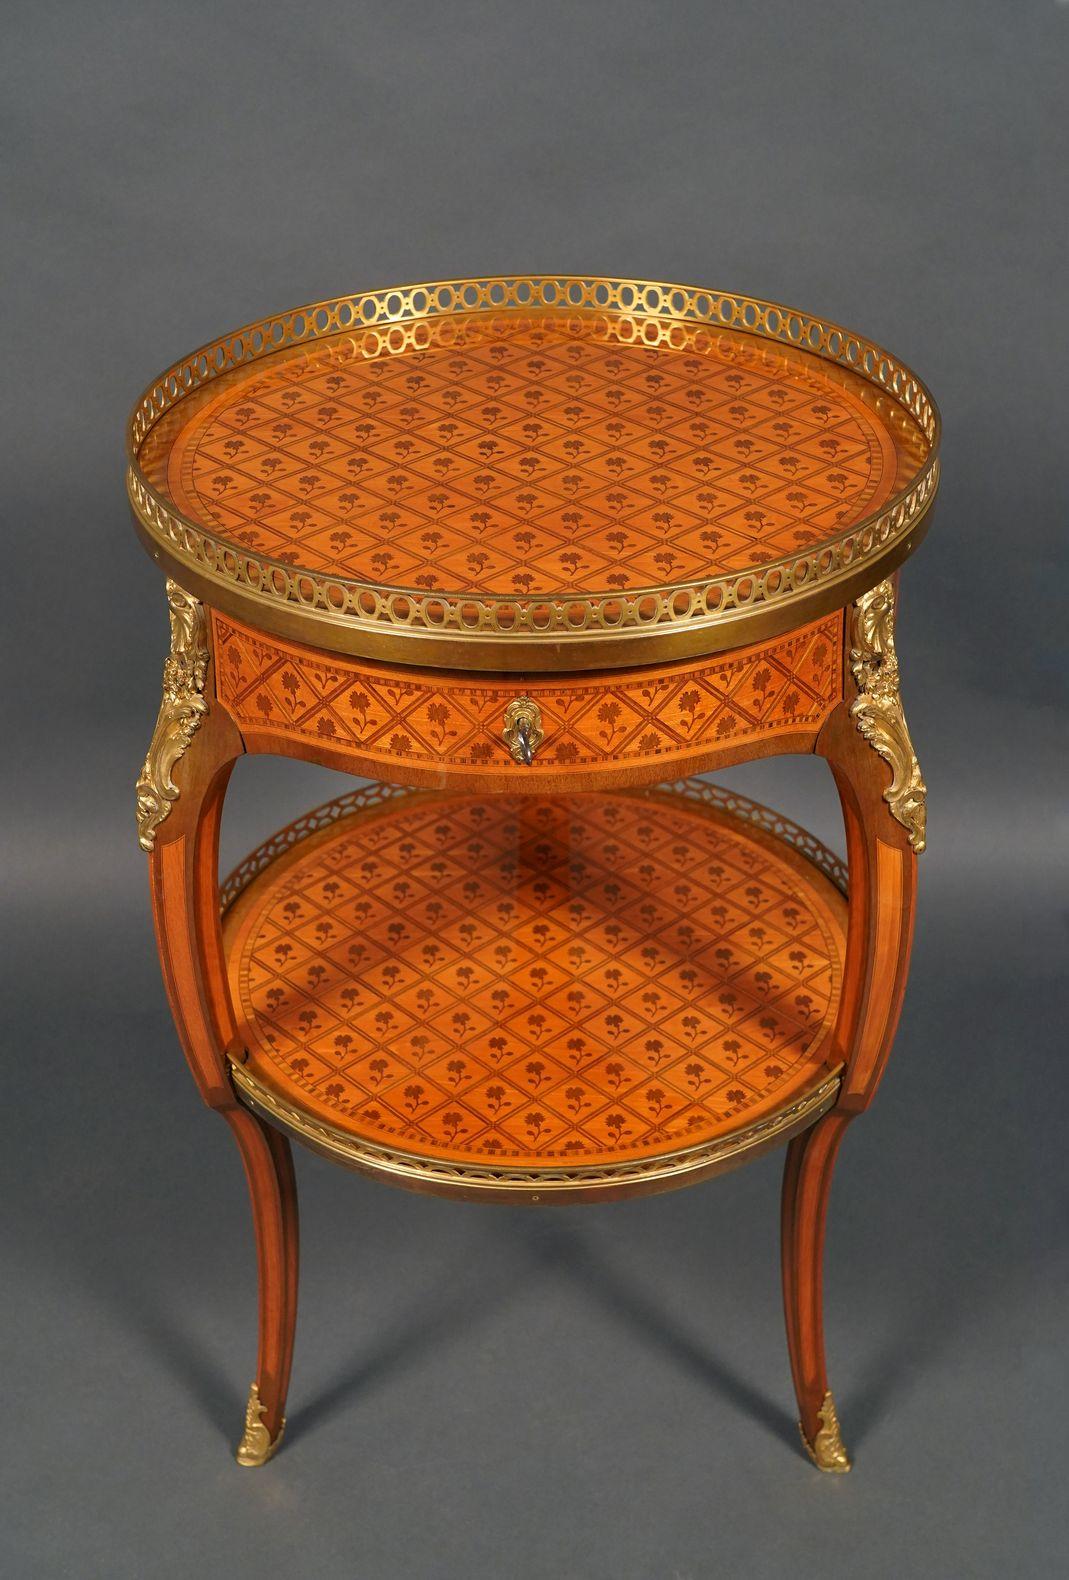 
Very fine Louis XV Style guéridon in green-stained wood marquetry , with fine ornamentation in chiseled and gilded bronze, opening with a drawer on the belt.
The tray top and the undershelf are surrounded by a gilded bronze openwork gallery and